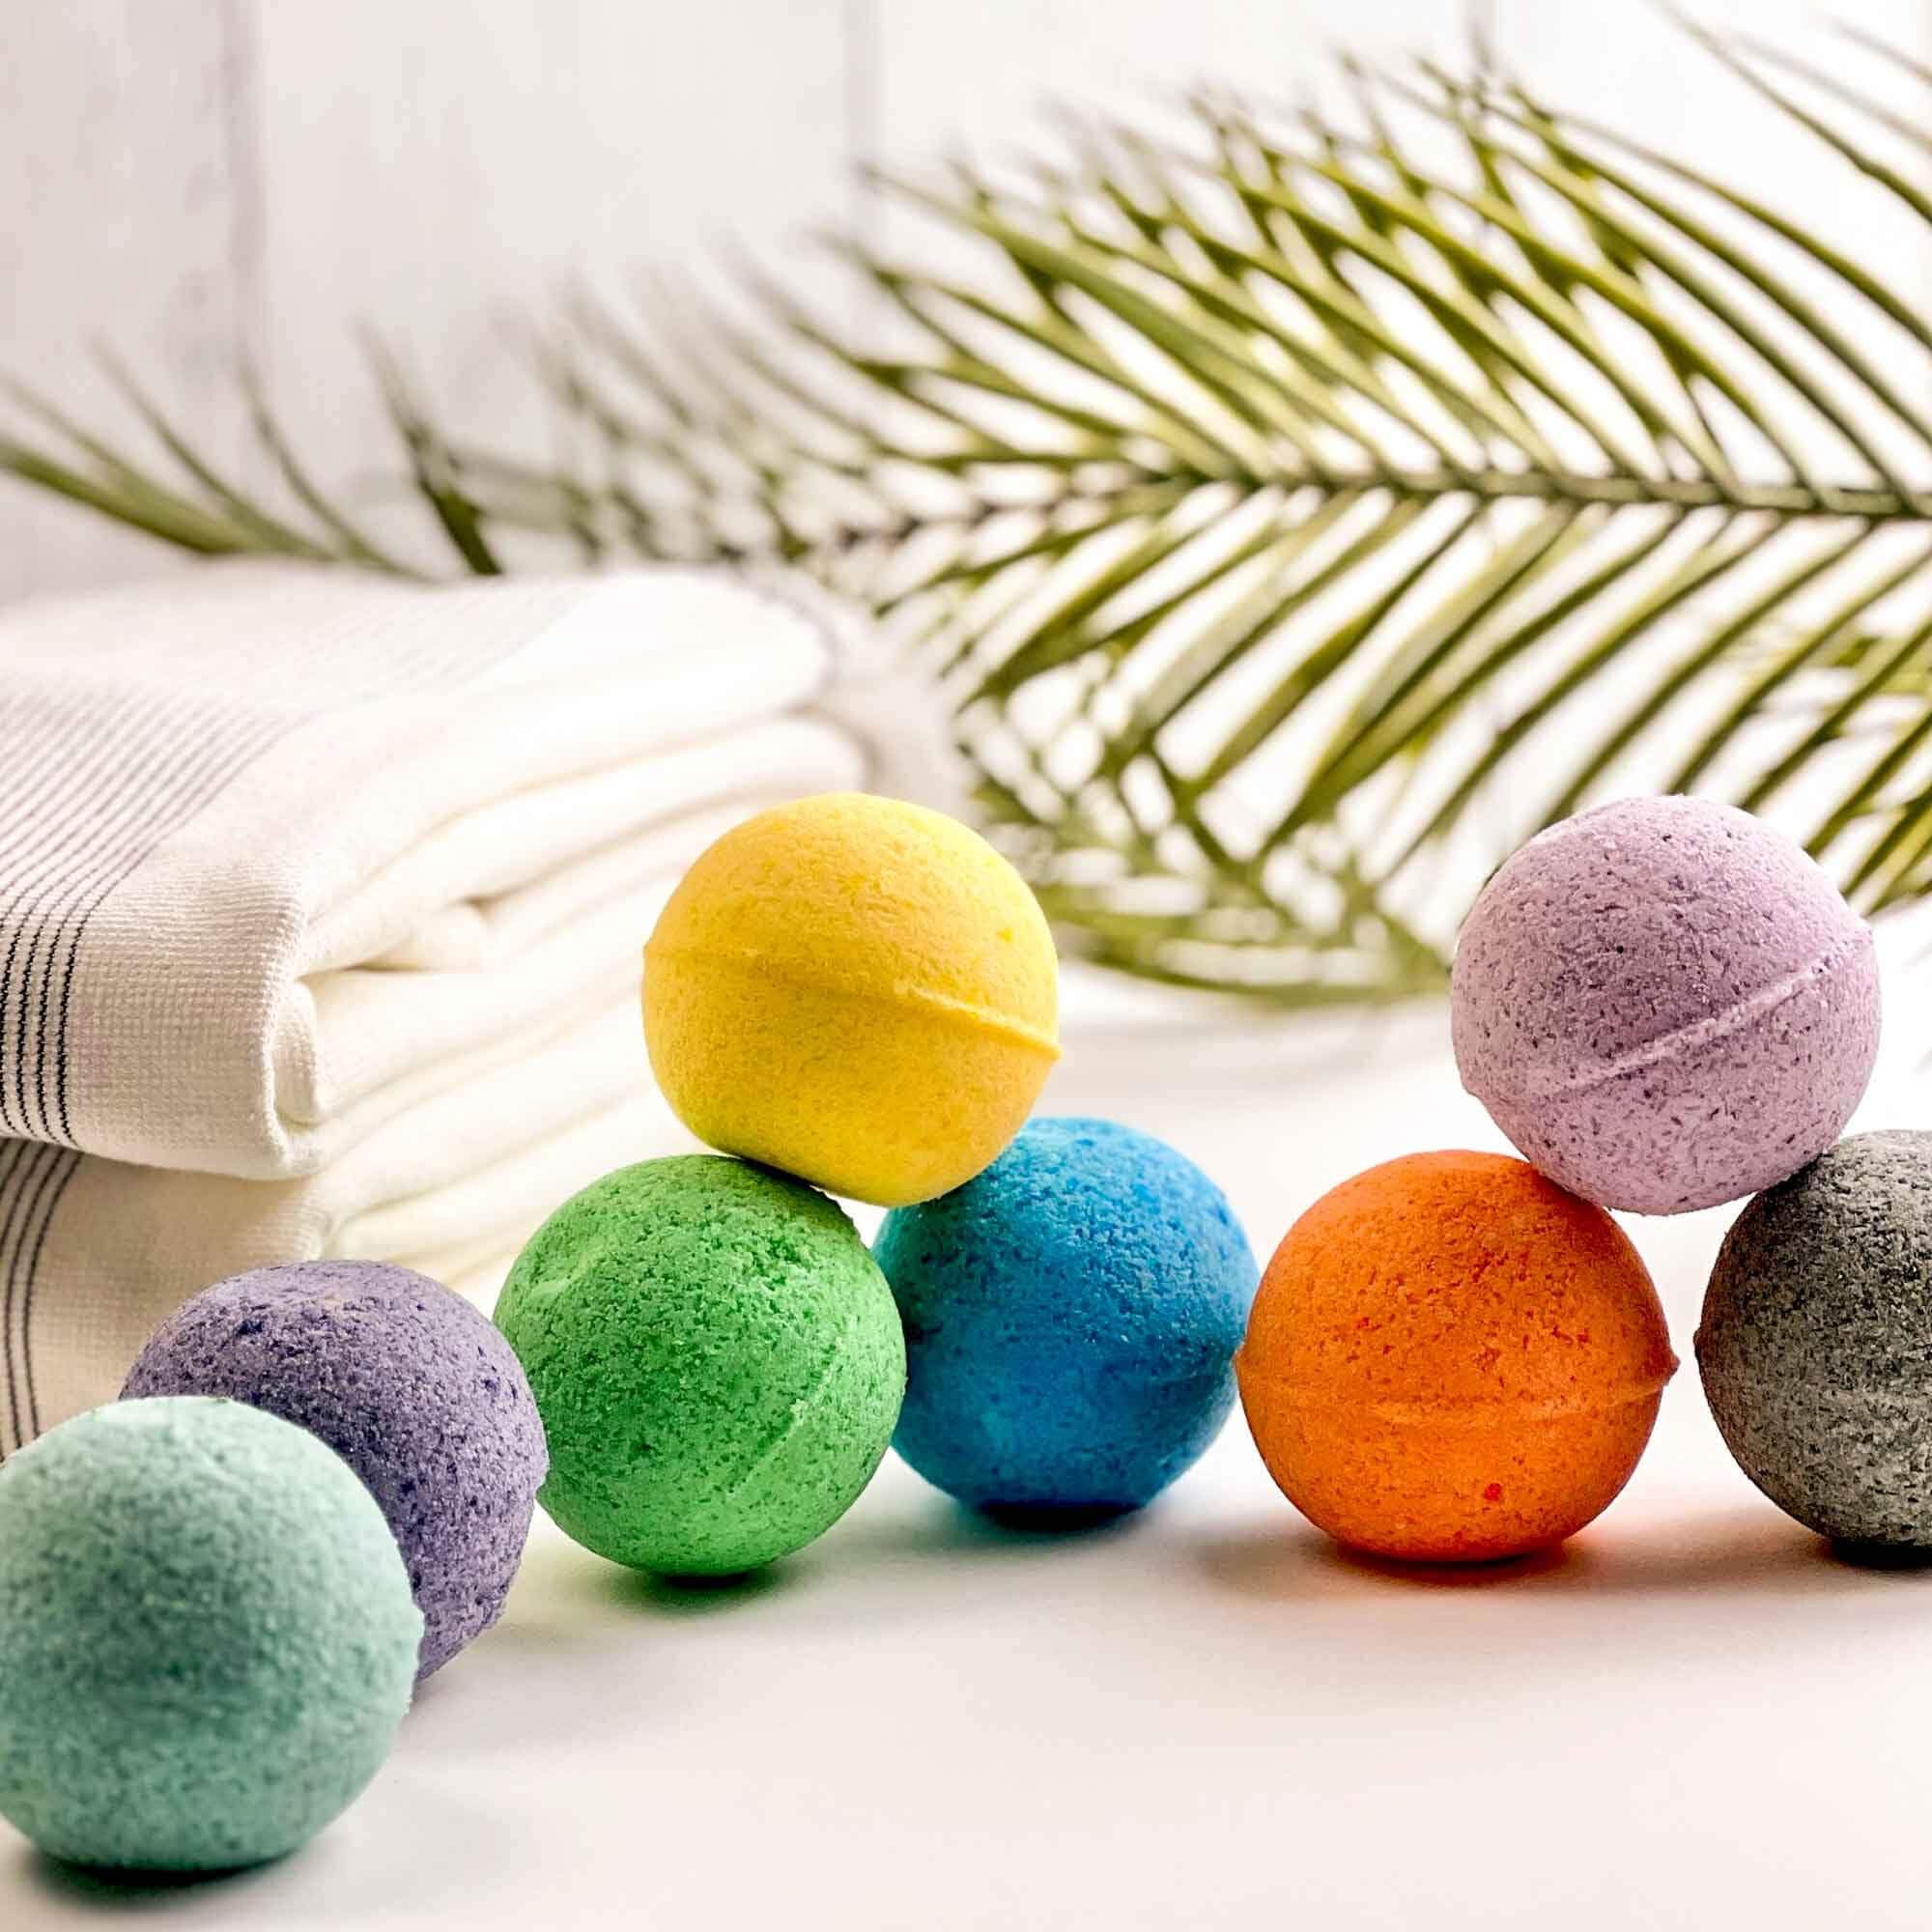 Handmade Honey Jasmine Bath Bombs | Natural and Relaxing | Perfect for Self-Care and Gifting